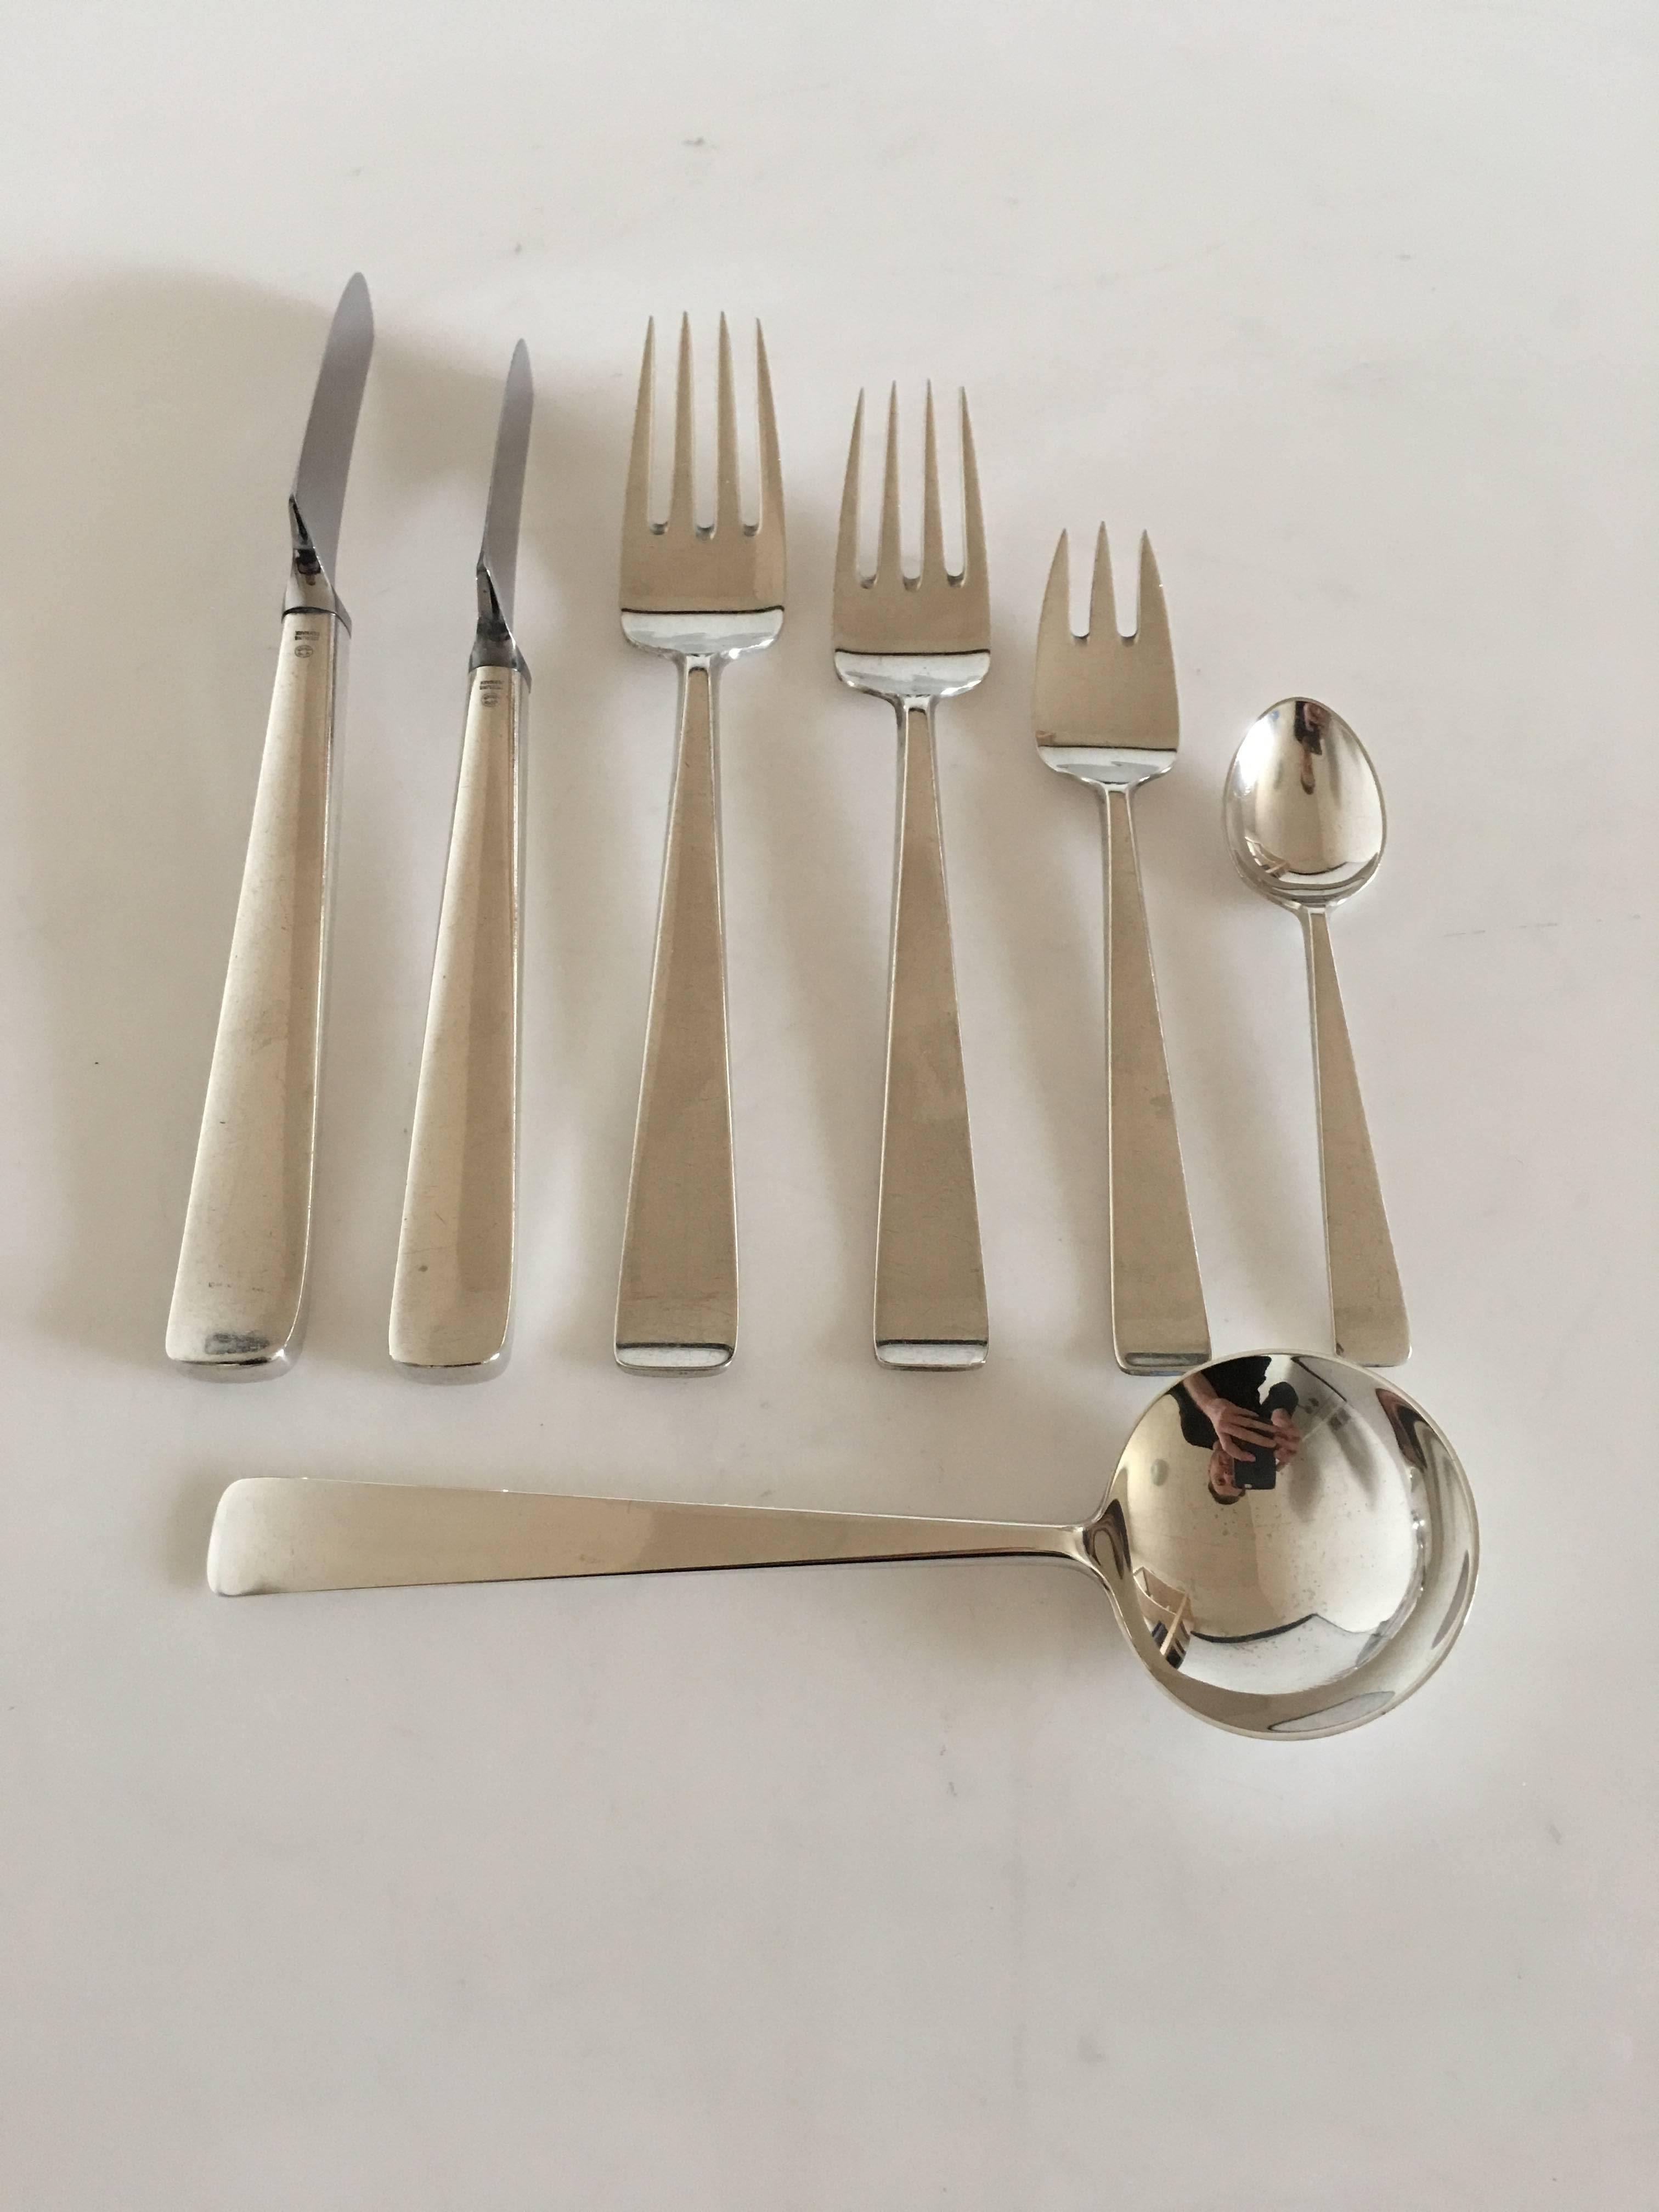 Georg Jensen sterling silver Margrethe cutlery or flatware set for six people. 40 pieces. The set consists of the following pieces; 

Six dinner knives 20.6 cm L (8 7/64